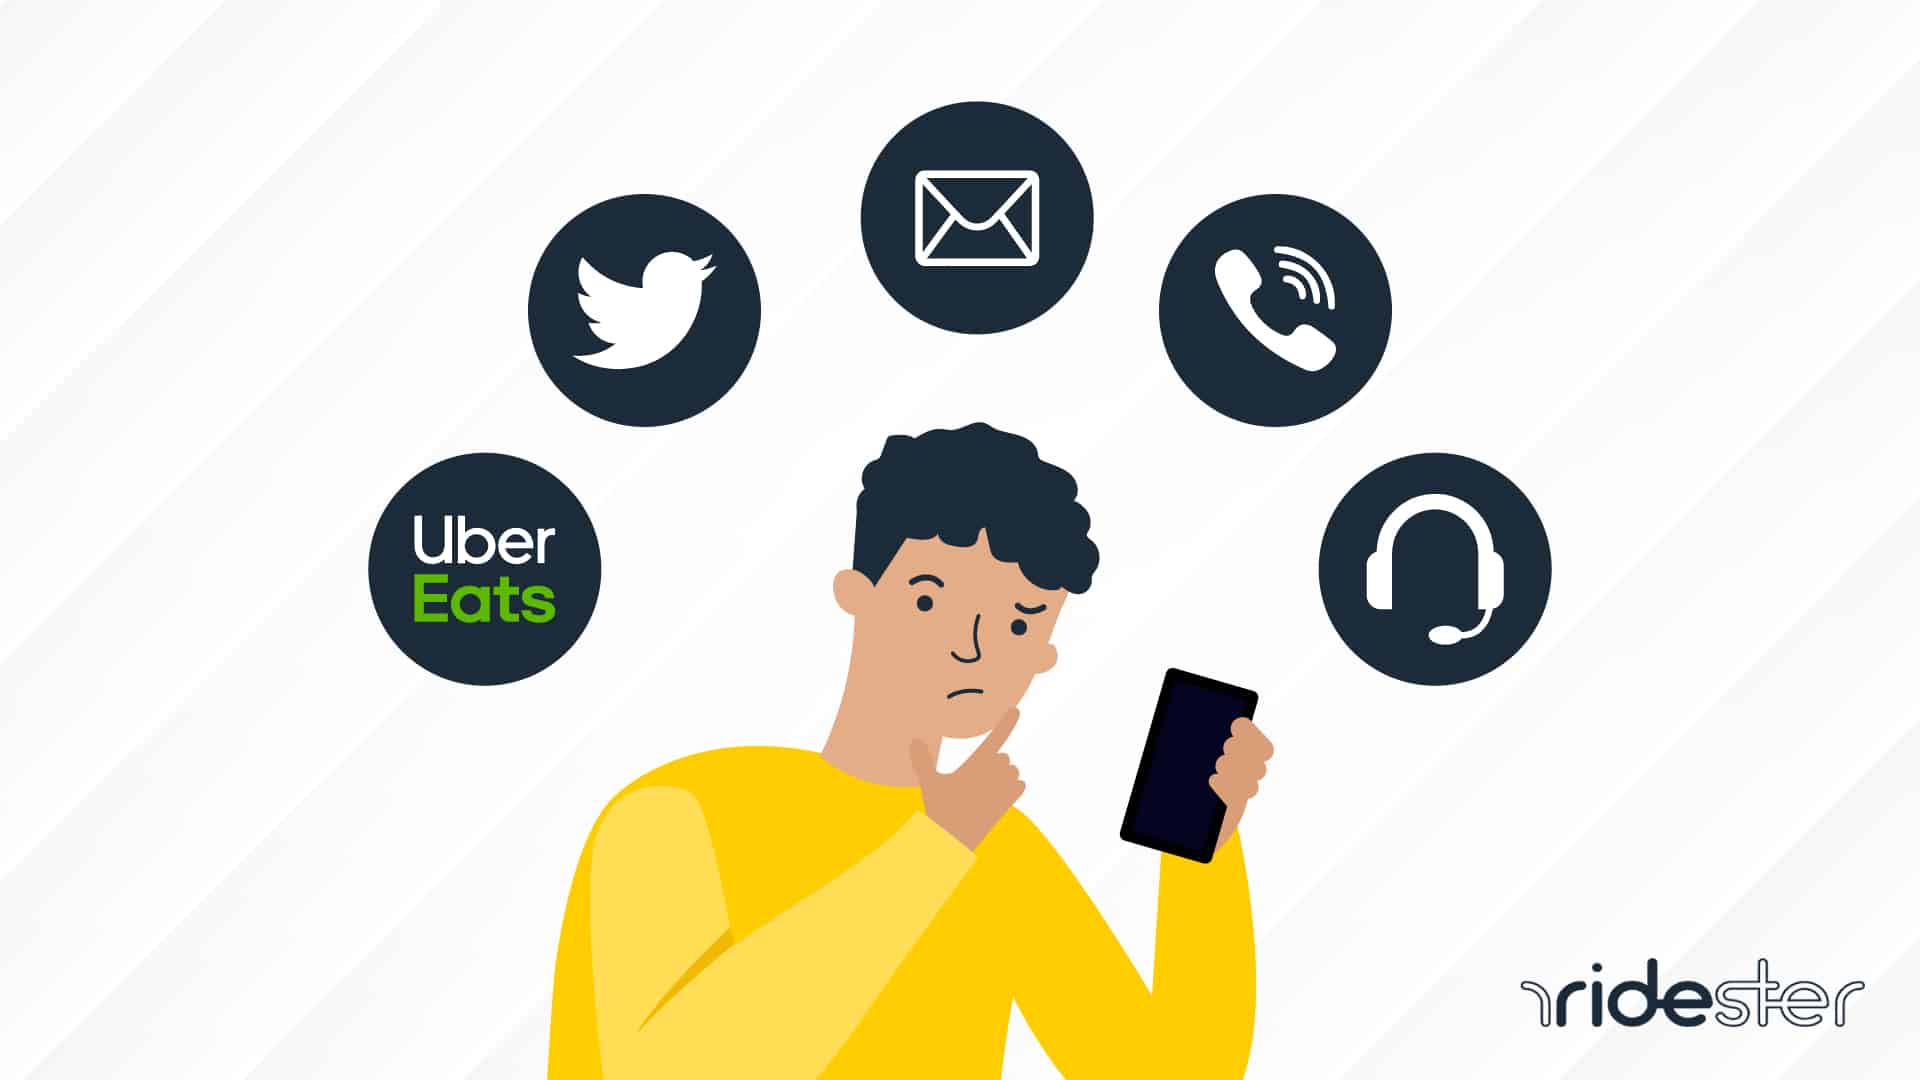 Vector image with person holding phone and showing the ways how to contact uber eats and wondering is uber eats worth it